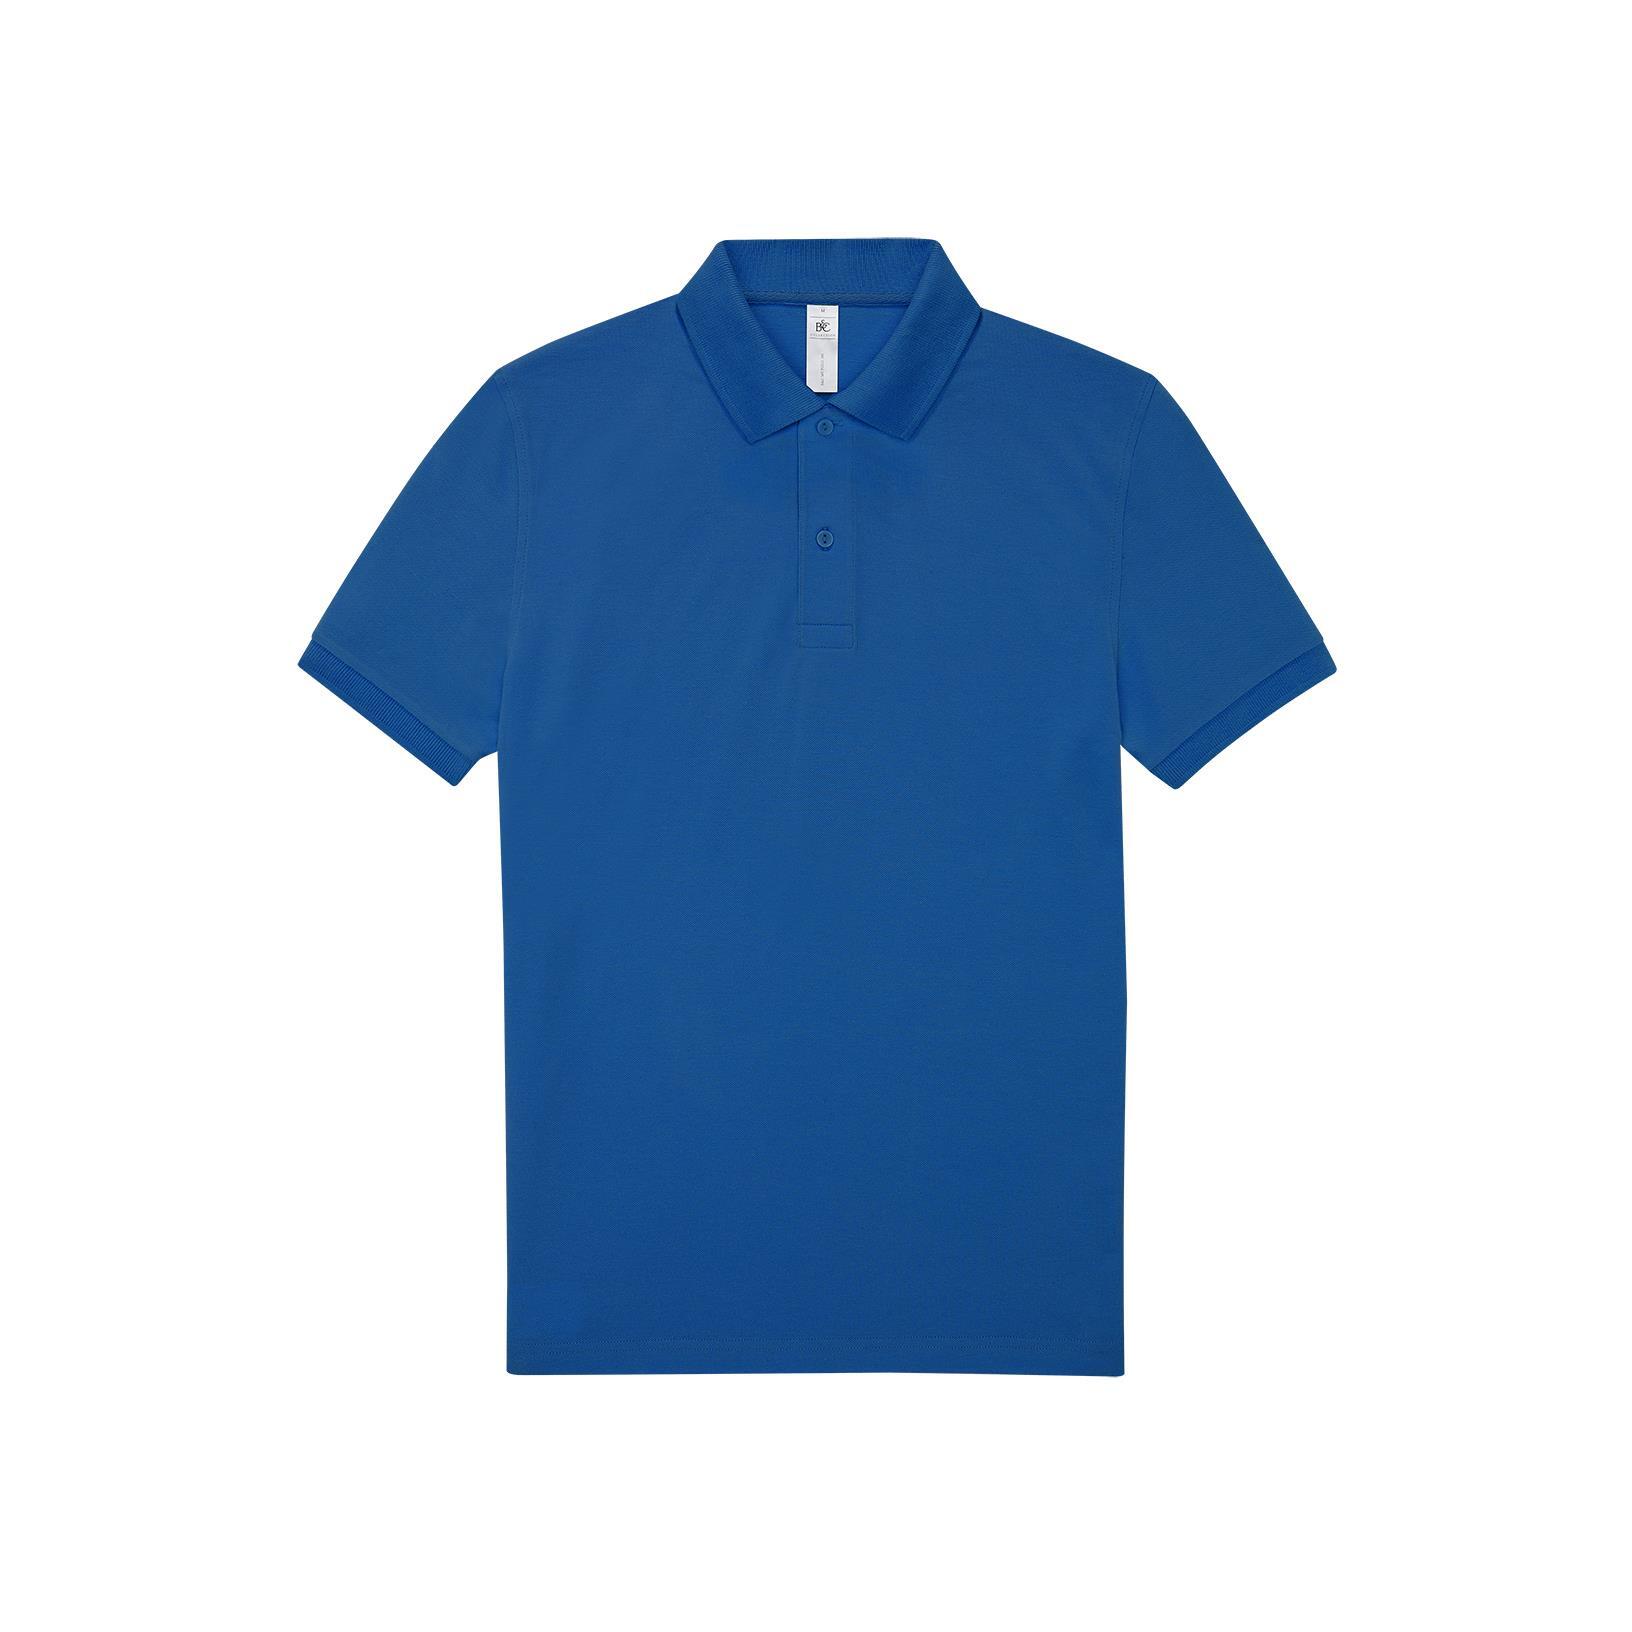 Polo voor mannen royal blauw moderne polo